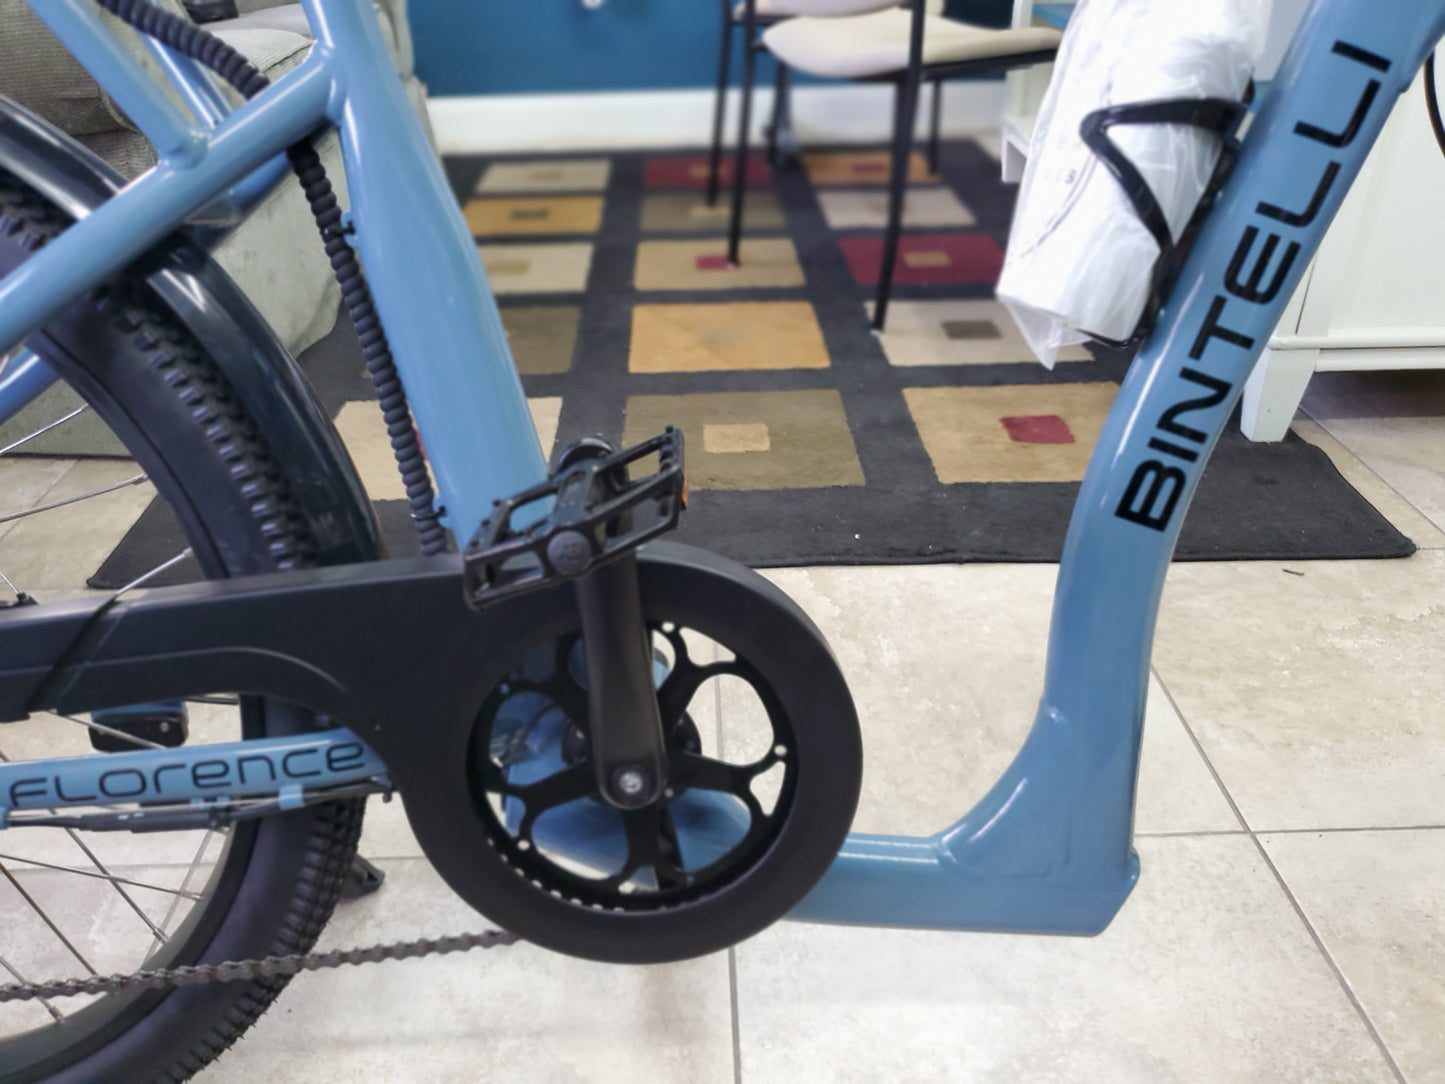 2022 BINTELLI FLORENCE STEP THROUGH ELECTRIC BIKE - Anvel - See it in Store Today